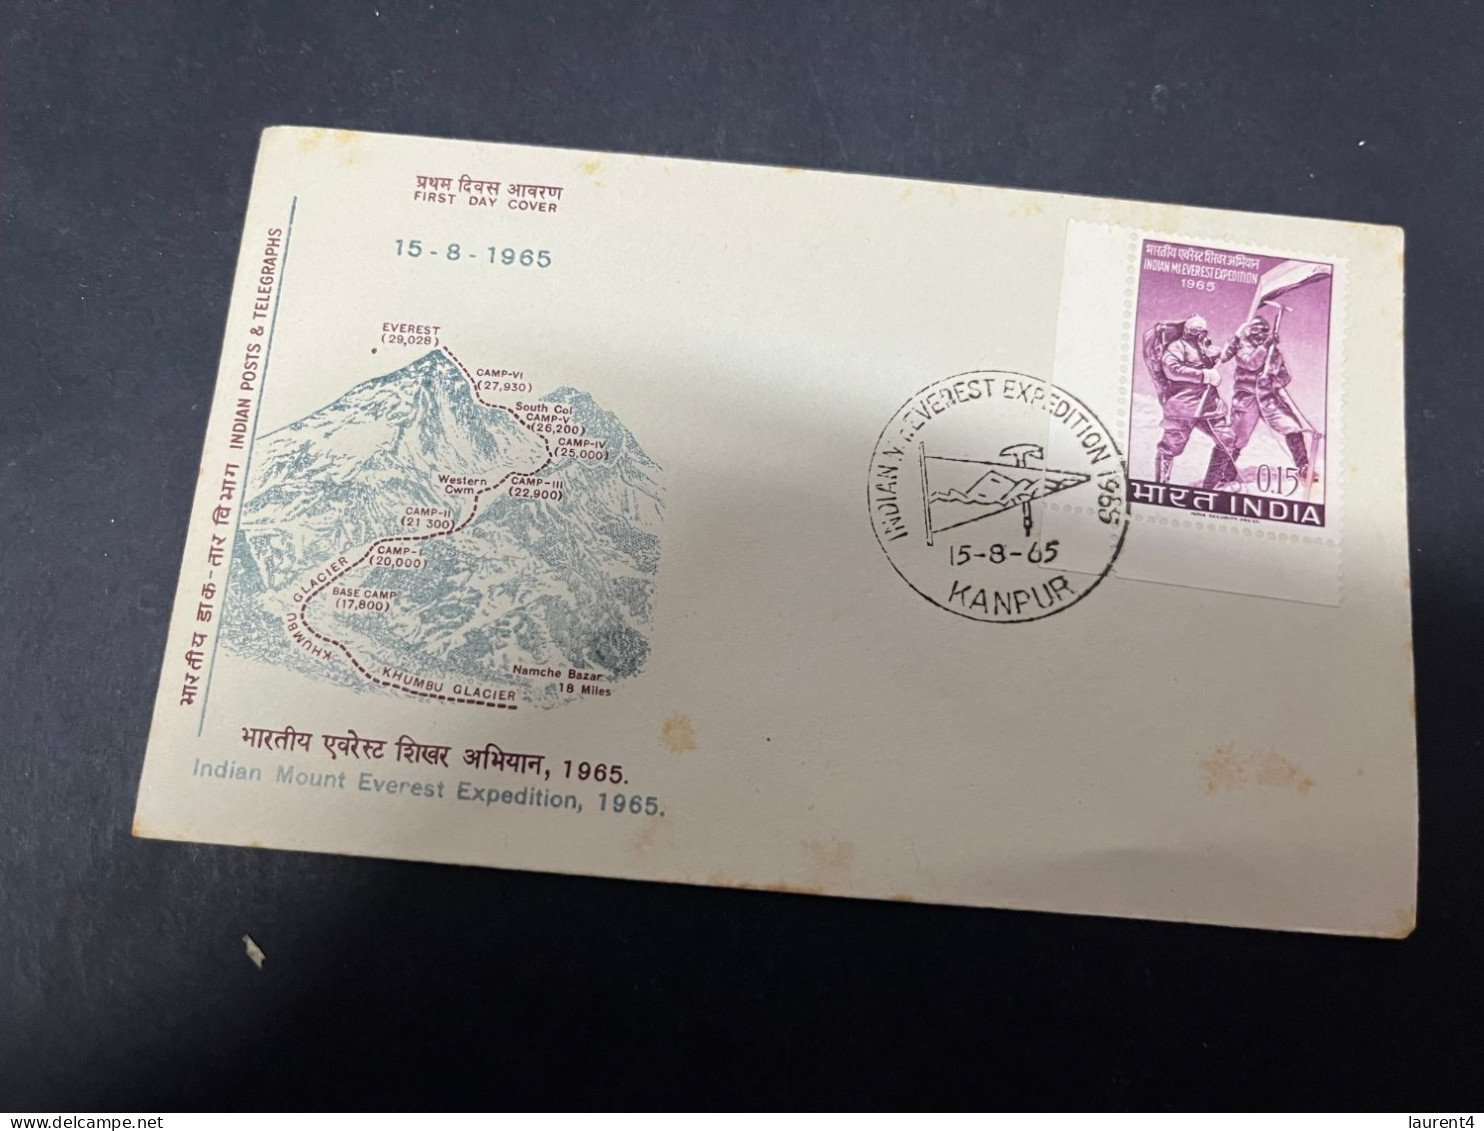 10-5-2024 (4 Z 37) INDIA FDC Cover - 1965 - Mount Everest Expedition - FDC